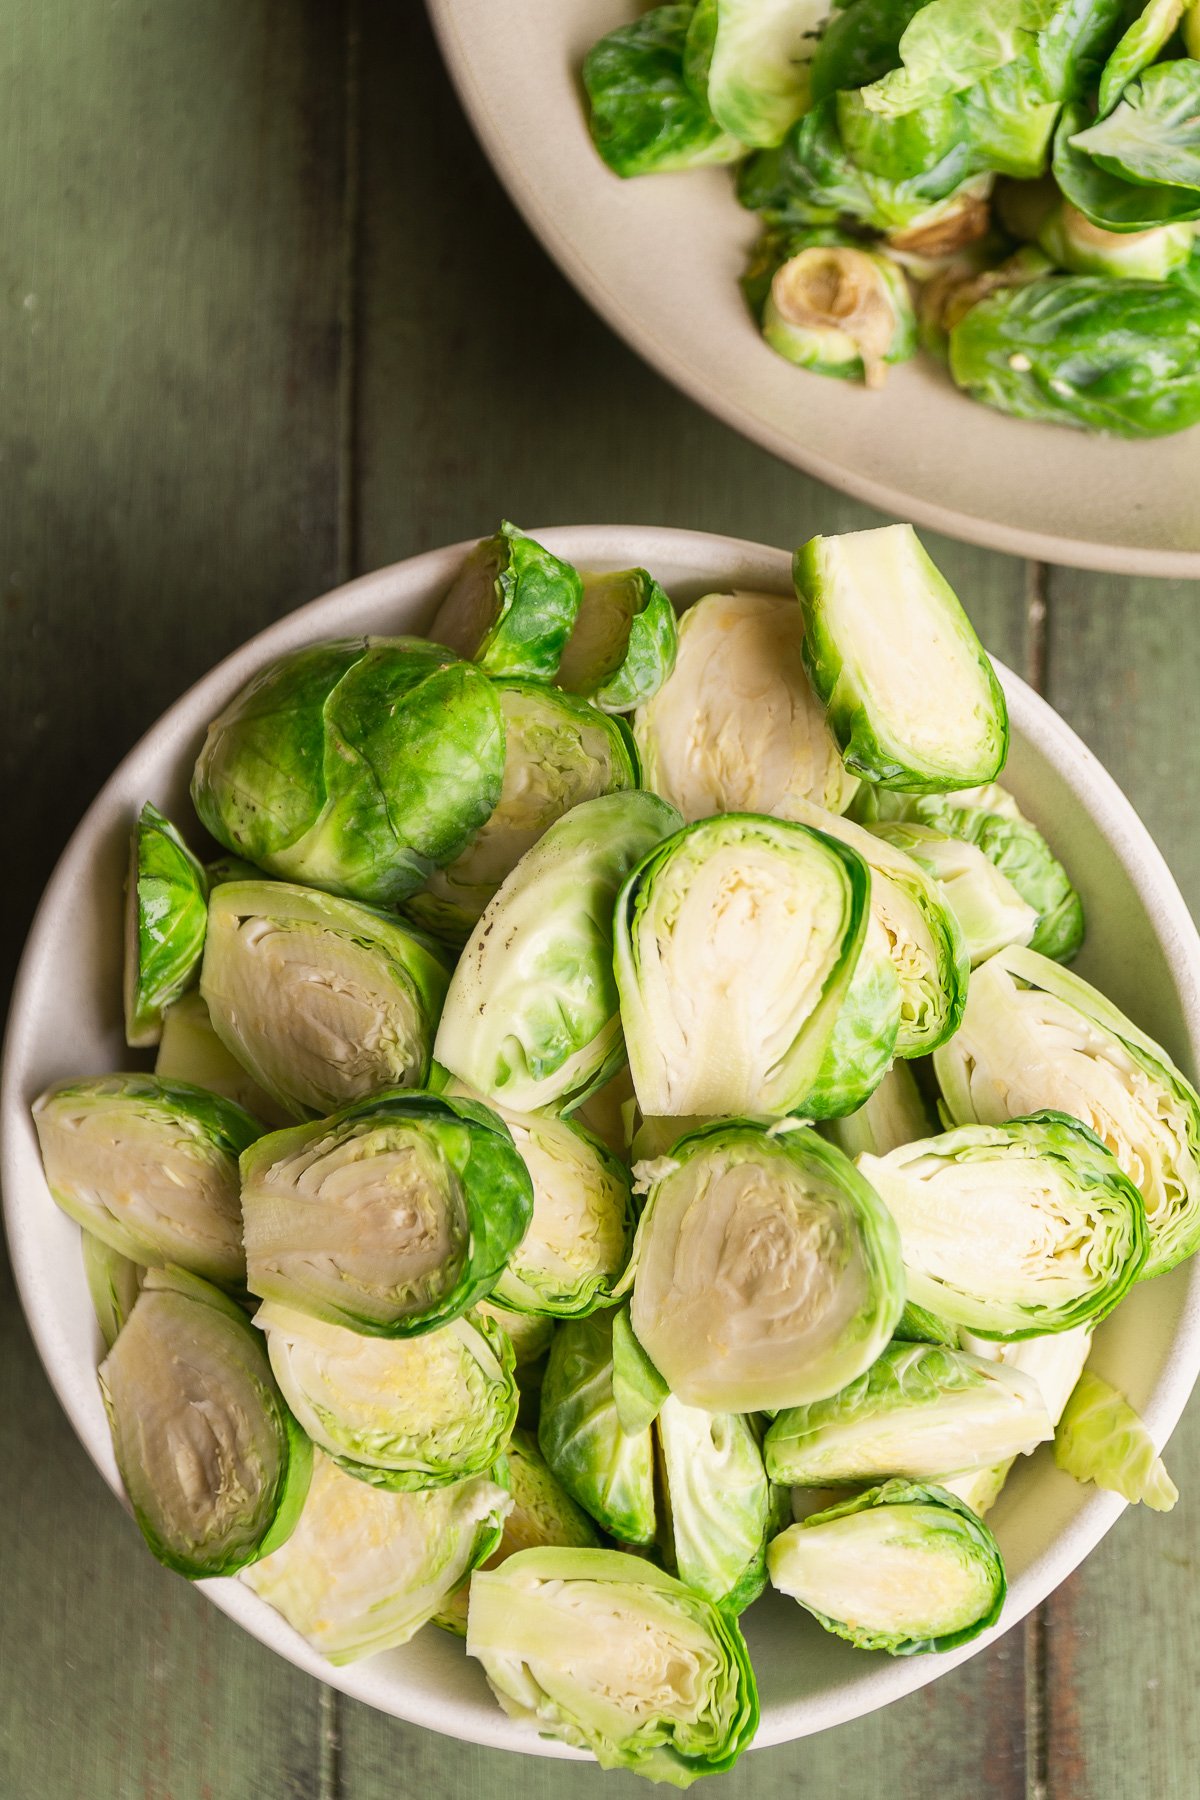 Brussel sprout halves in a white bowl.